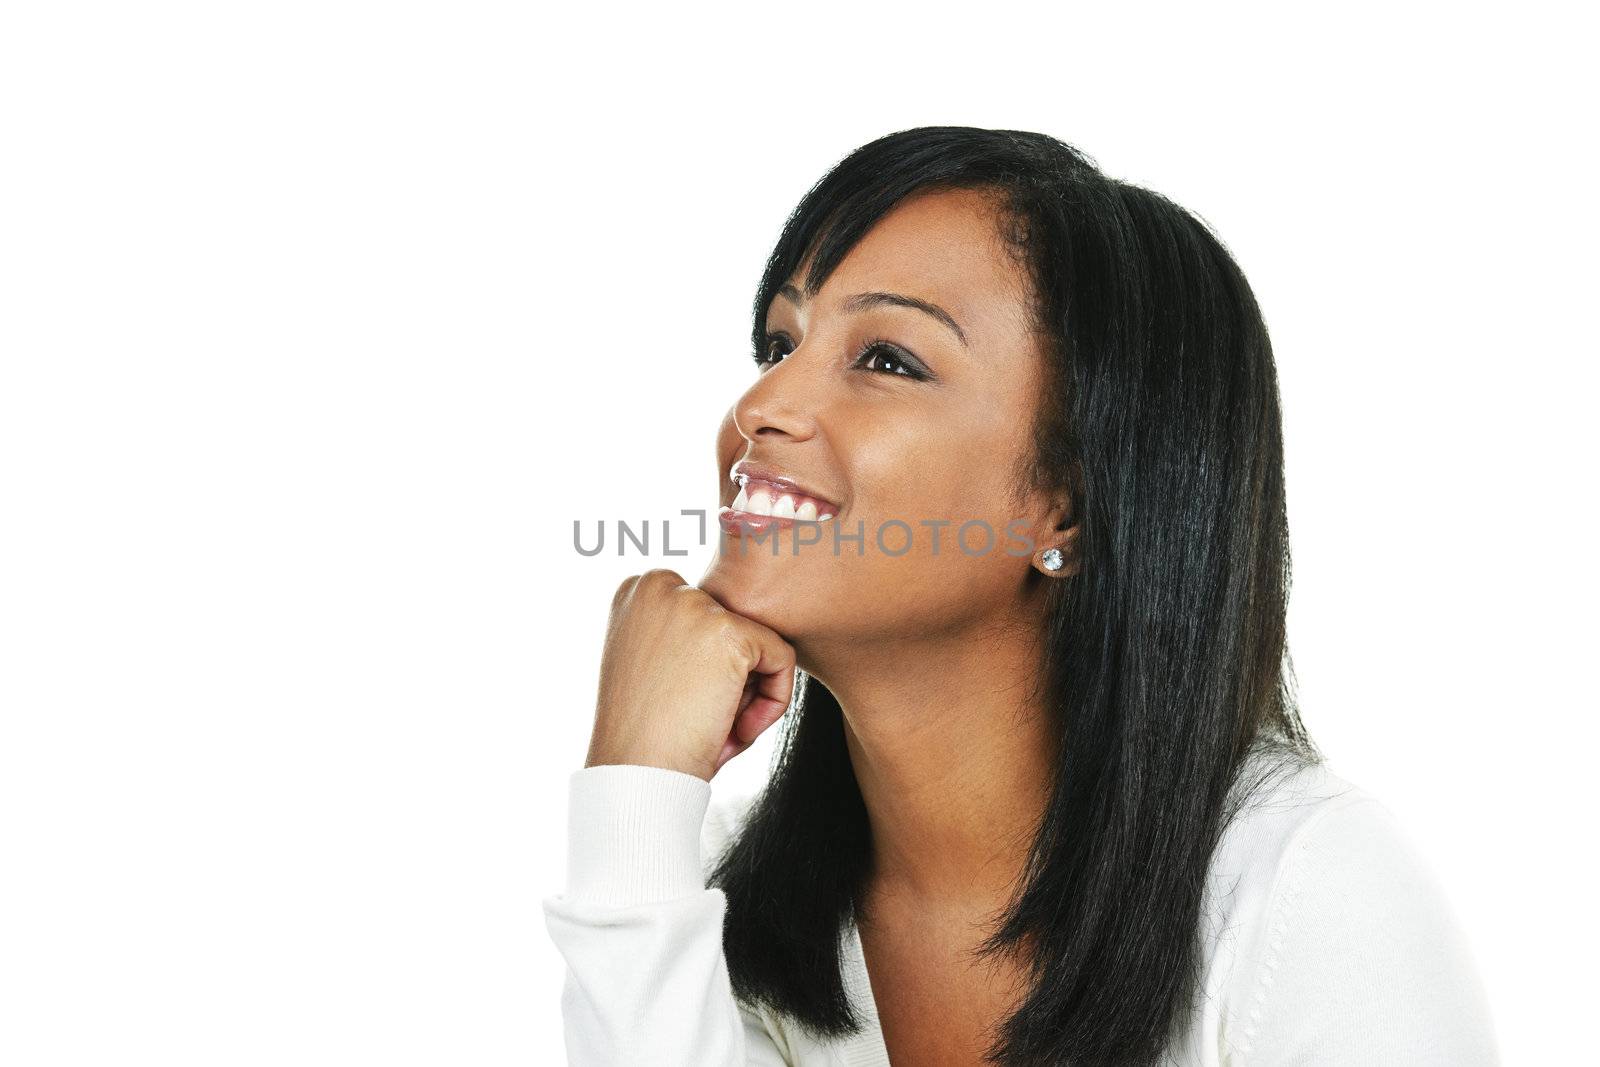 Smiling black woman looking up portrait isolated on white background